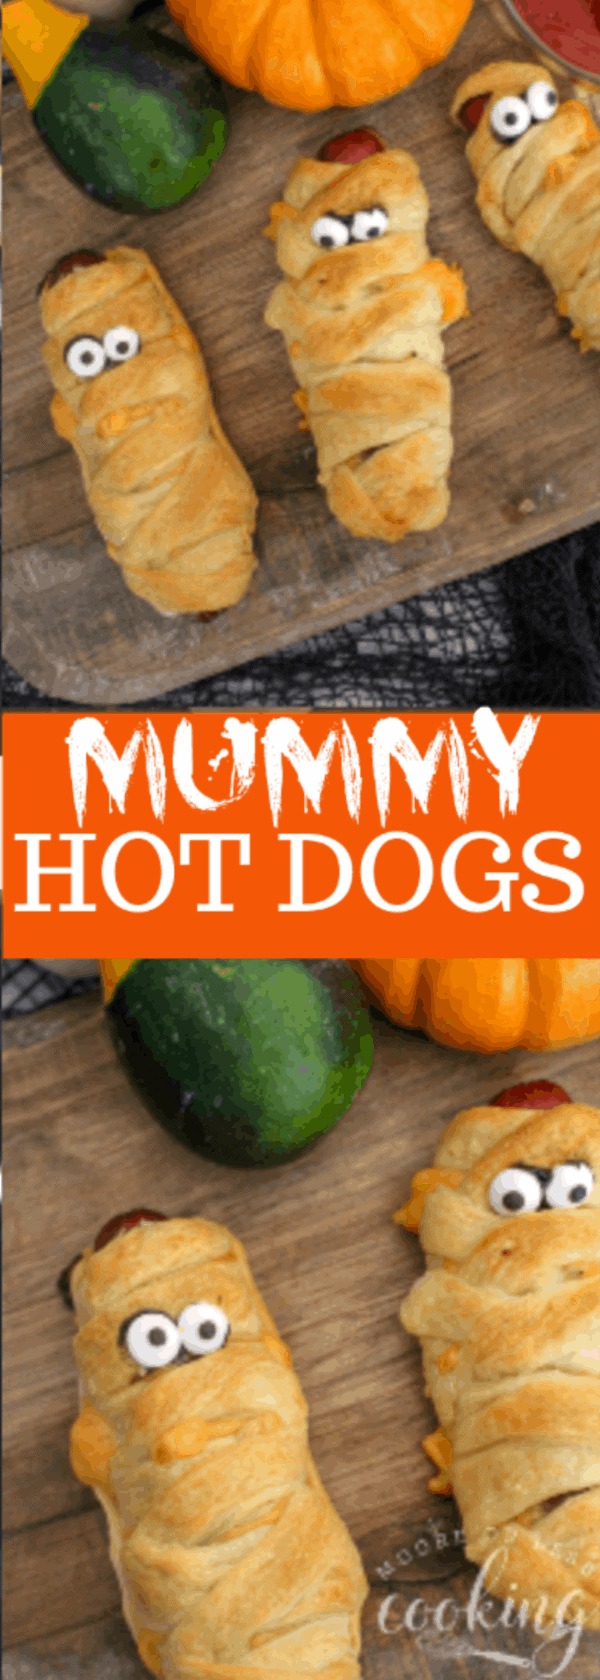 Mummy Hot Dogs are so fun to make and especially delicious to eat! Kids love to help make these spooky treats! via @Mooreorlesscook